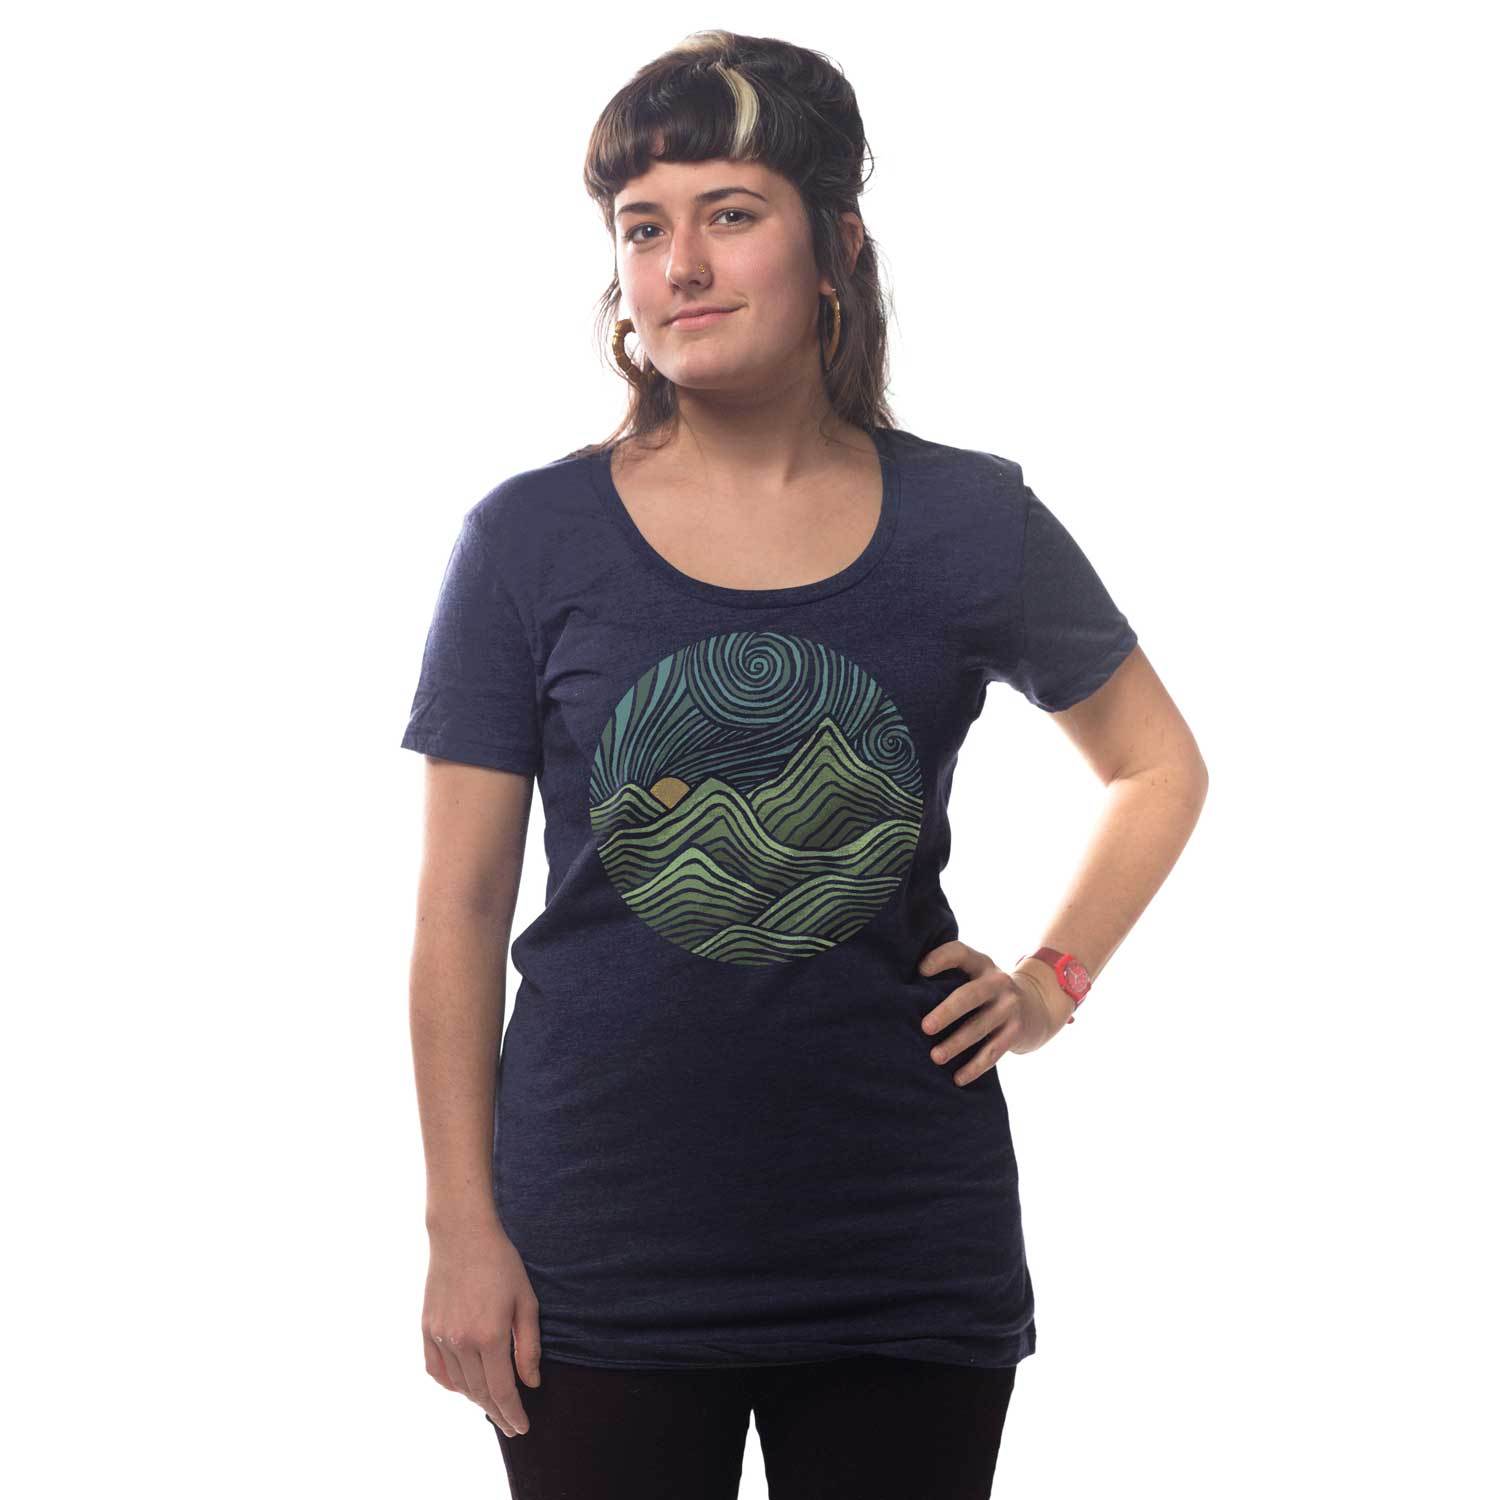 Women's Swirly Mountains Vintage Graphic Tee | Cool Colorful Nature T-Shirt on Model | Solid Threads